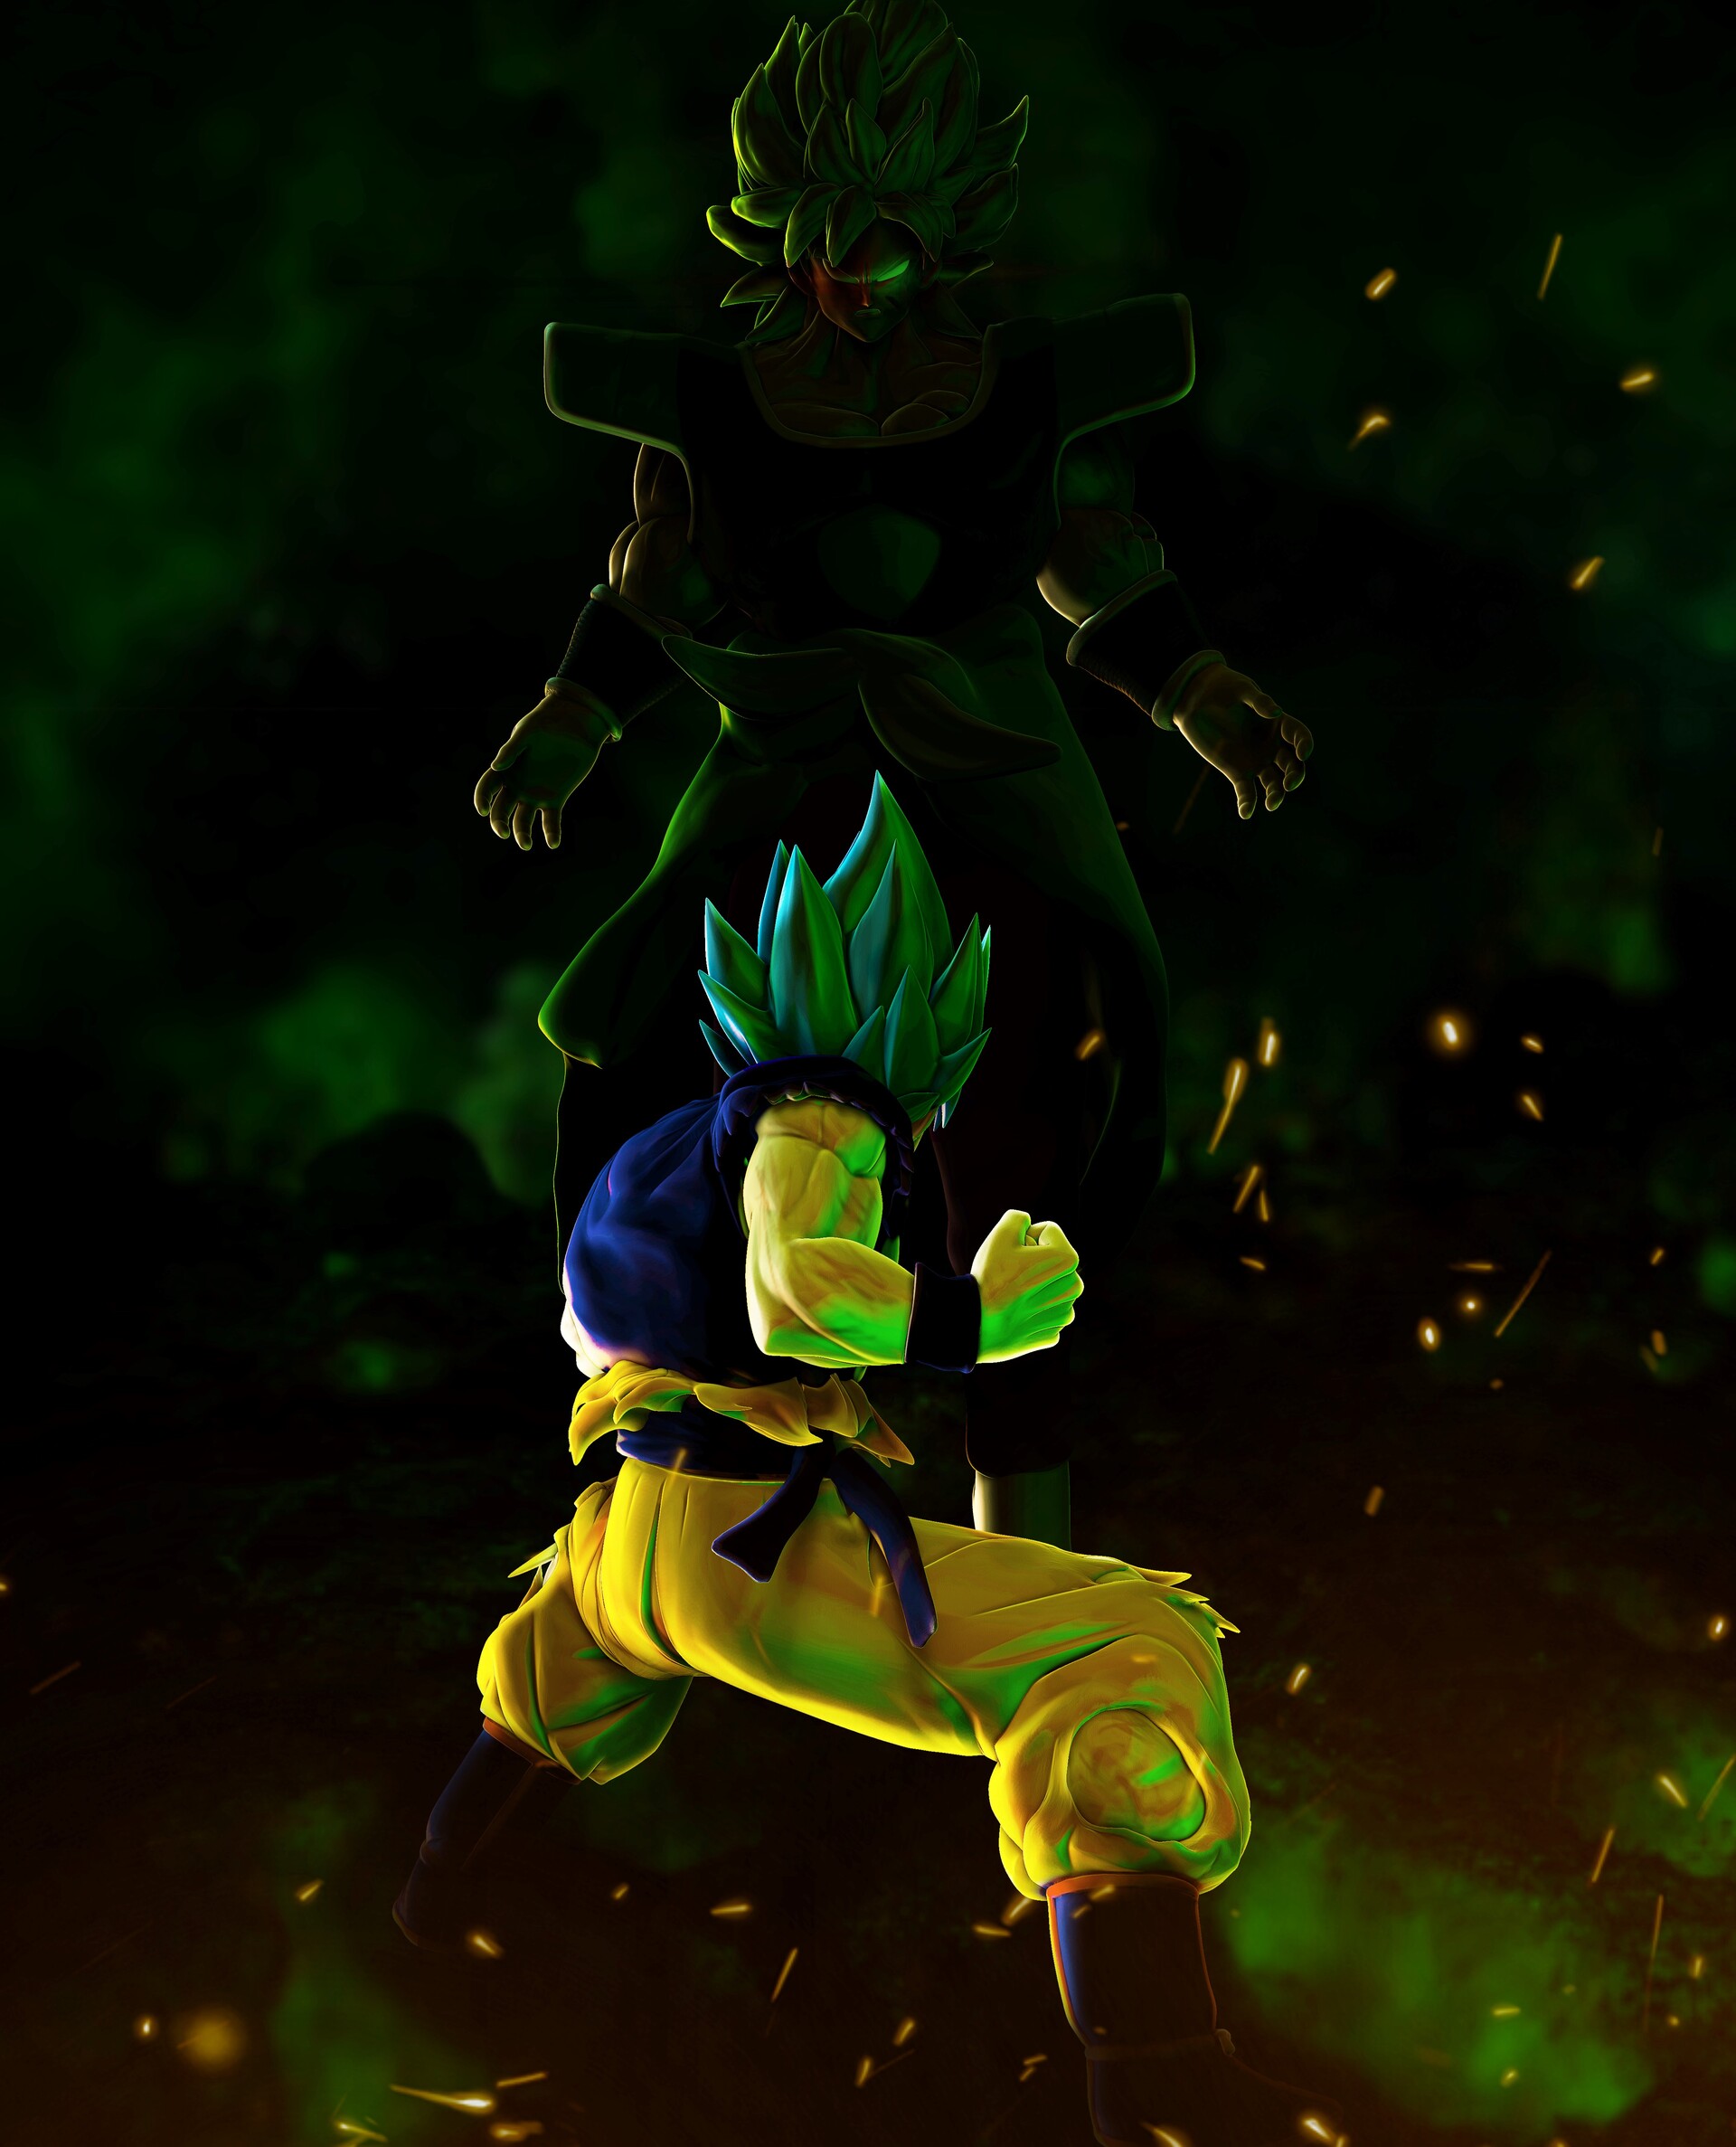 Gogeta SSJ Blue, from the movie dragon ball super broly – Xenoverse Mods